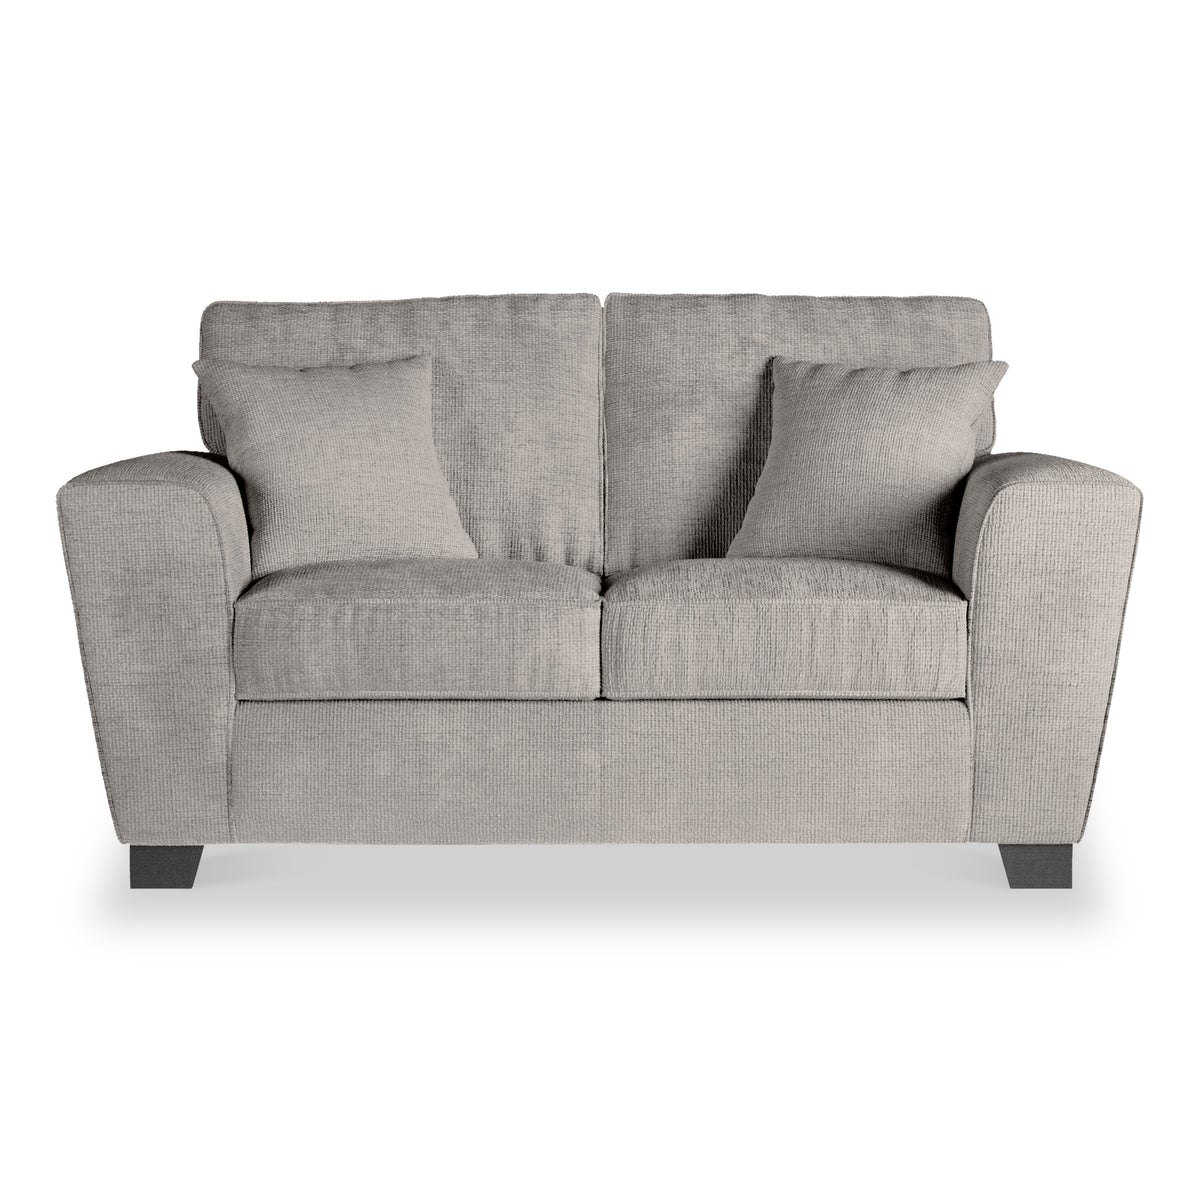 Chester Pewter Hopsack 2 Seater couch